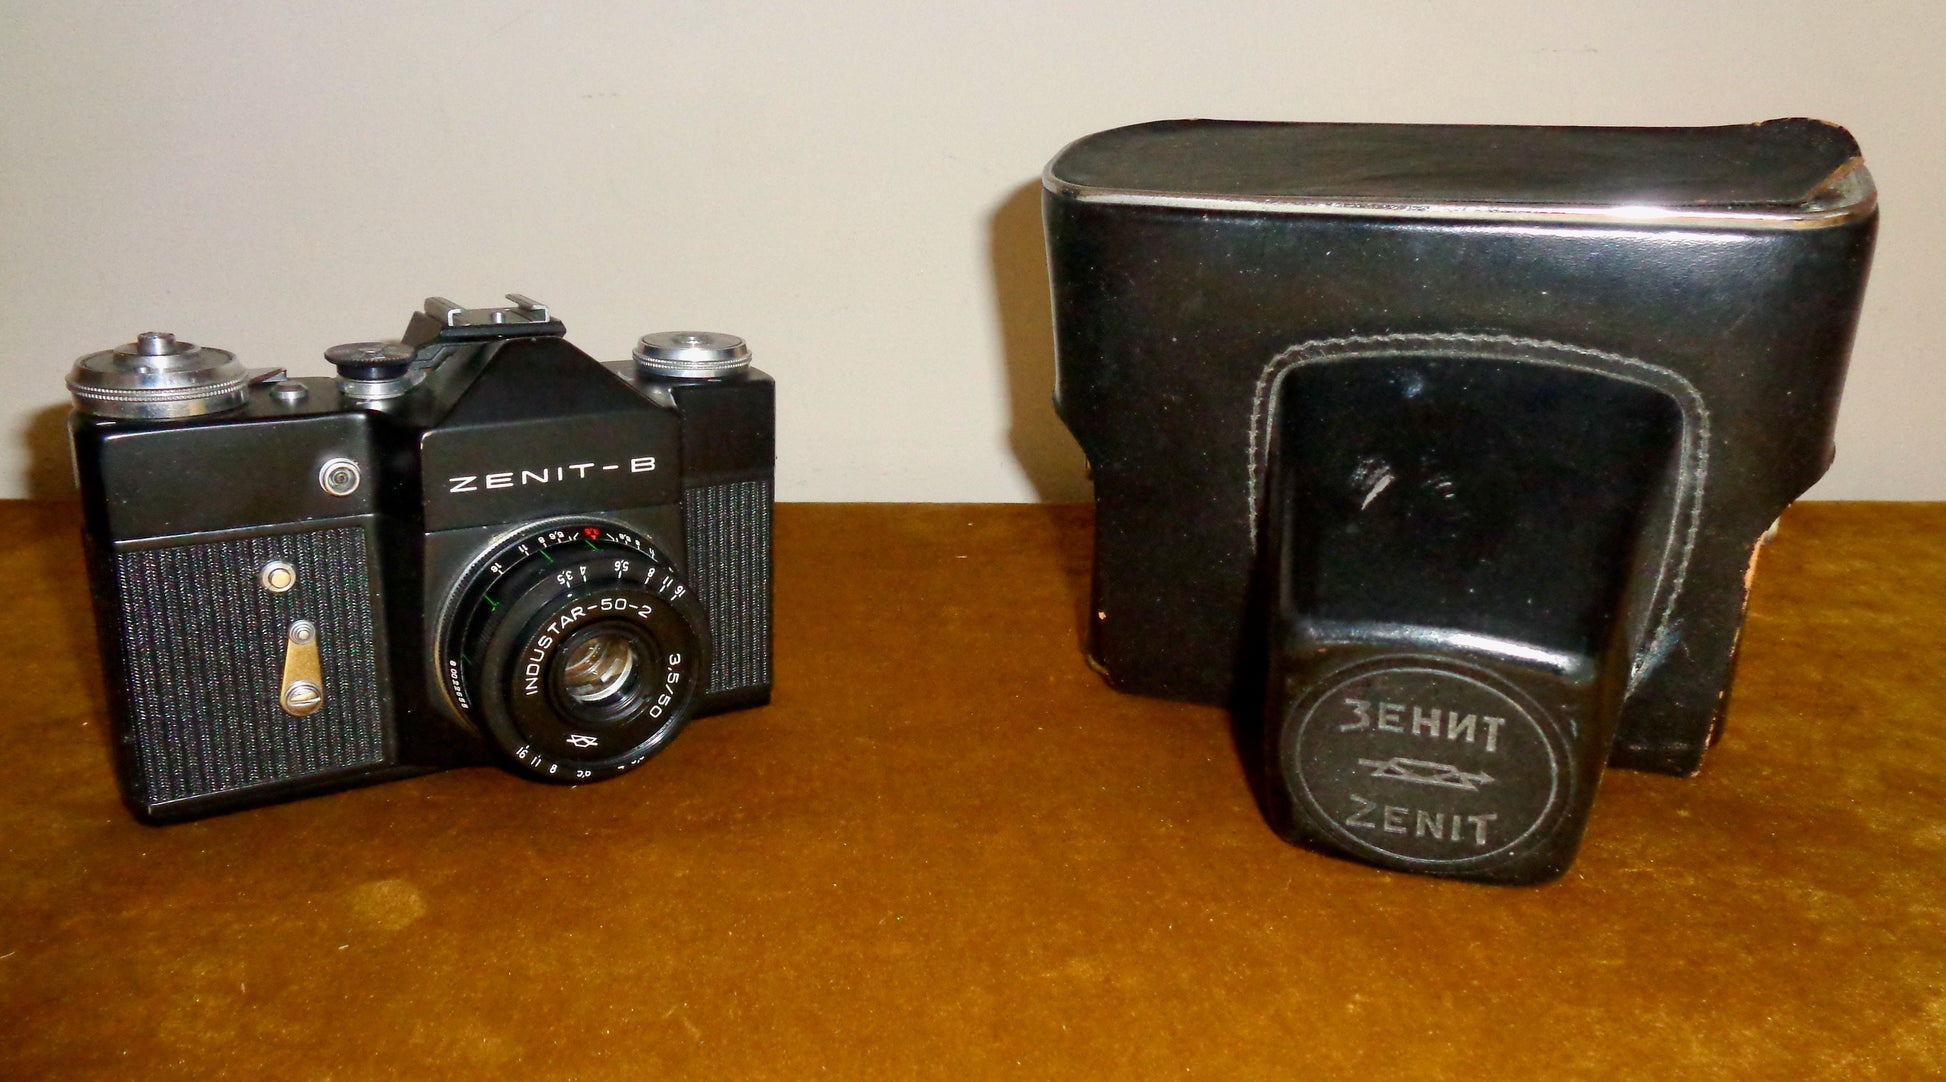 Vintage Zenit B 35mm SLR Film Camera With Industar 50-2 f3.5/50 Lens and Ever Ready Case